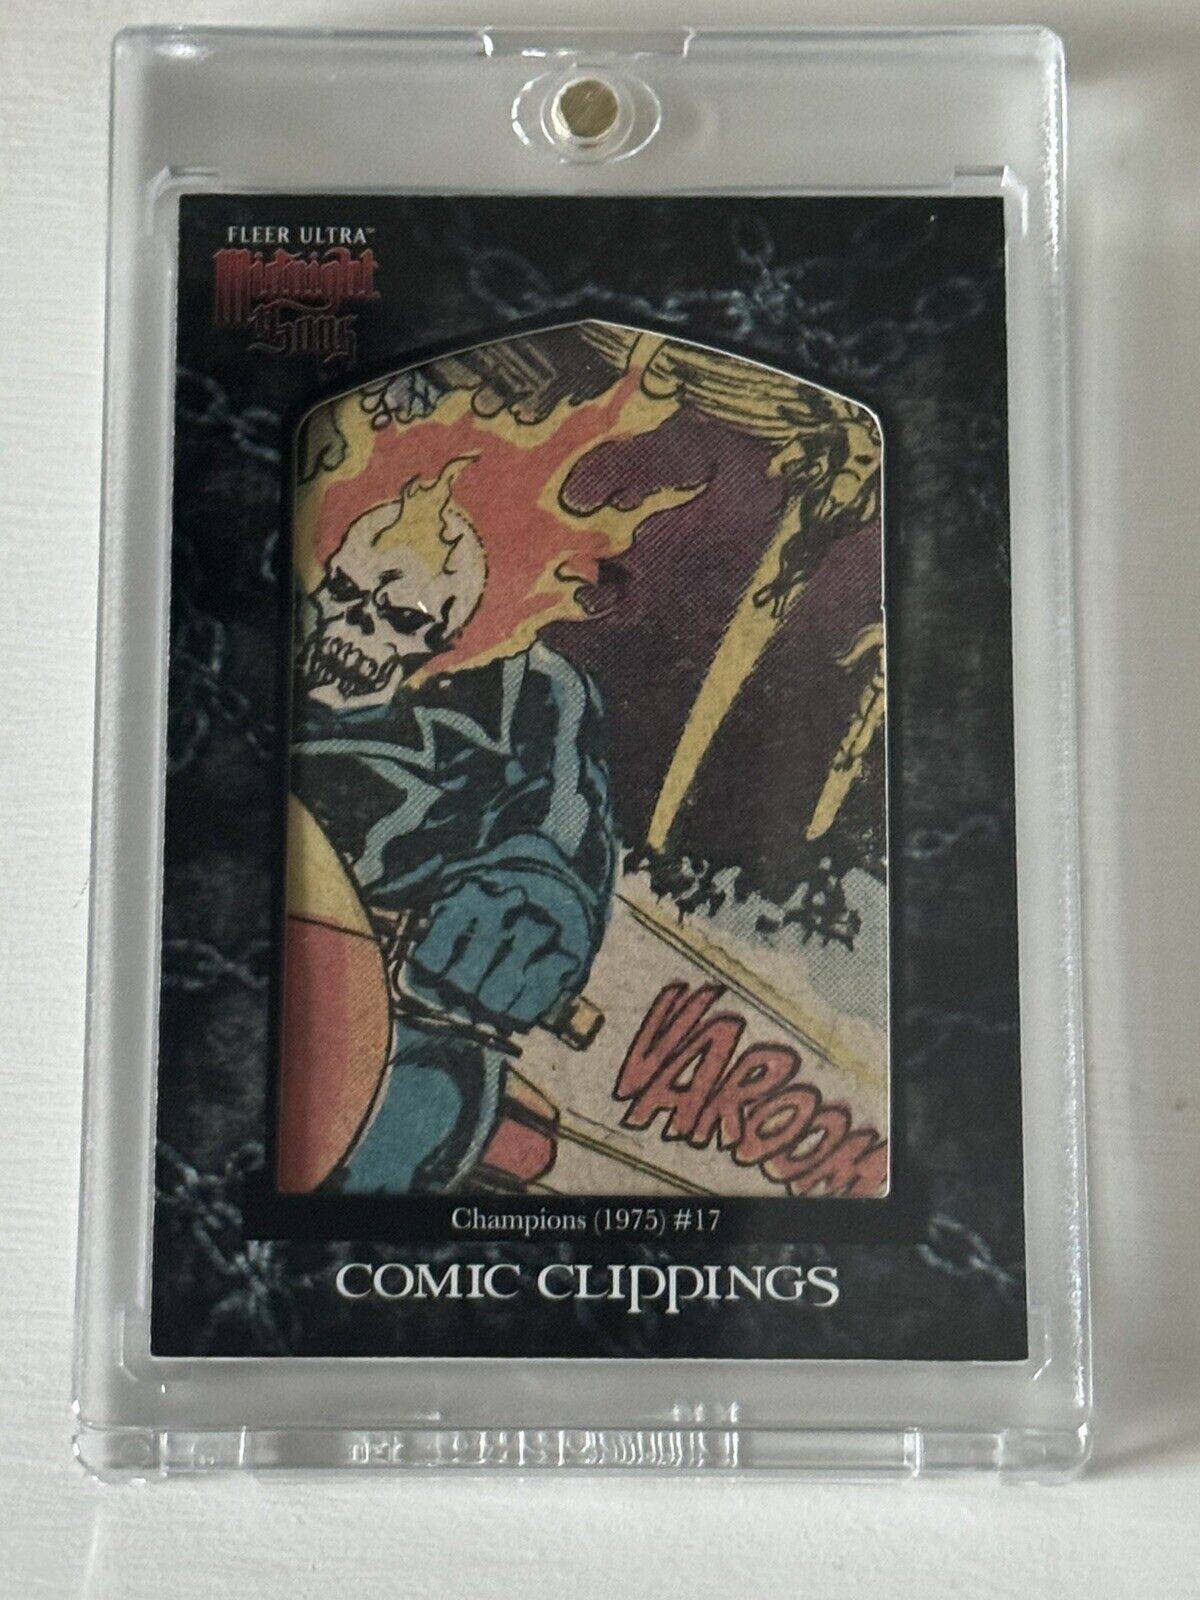 2023 Fleer Ultra Midnight Sons Champions #17 Comic Clipping 07/40